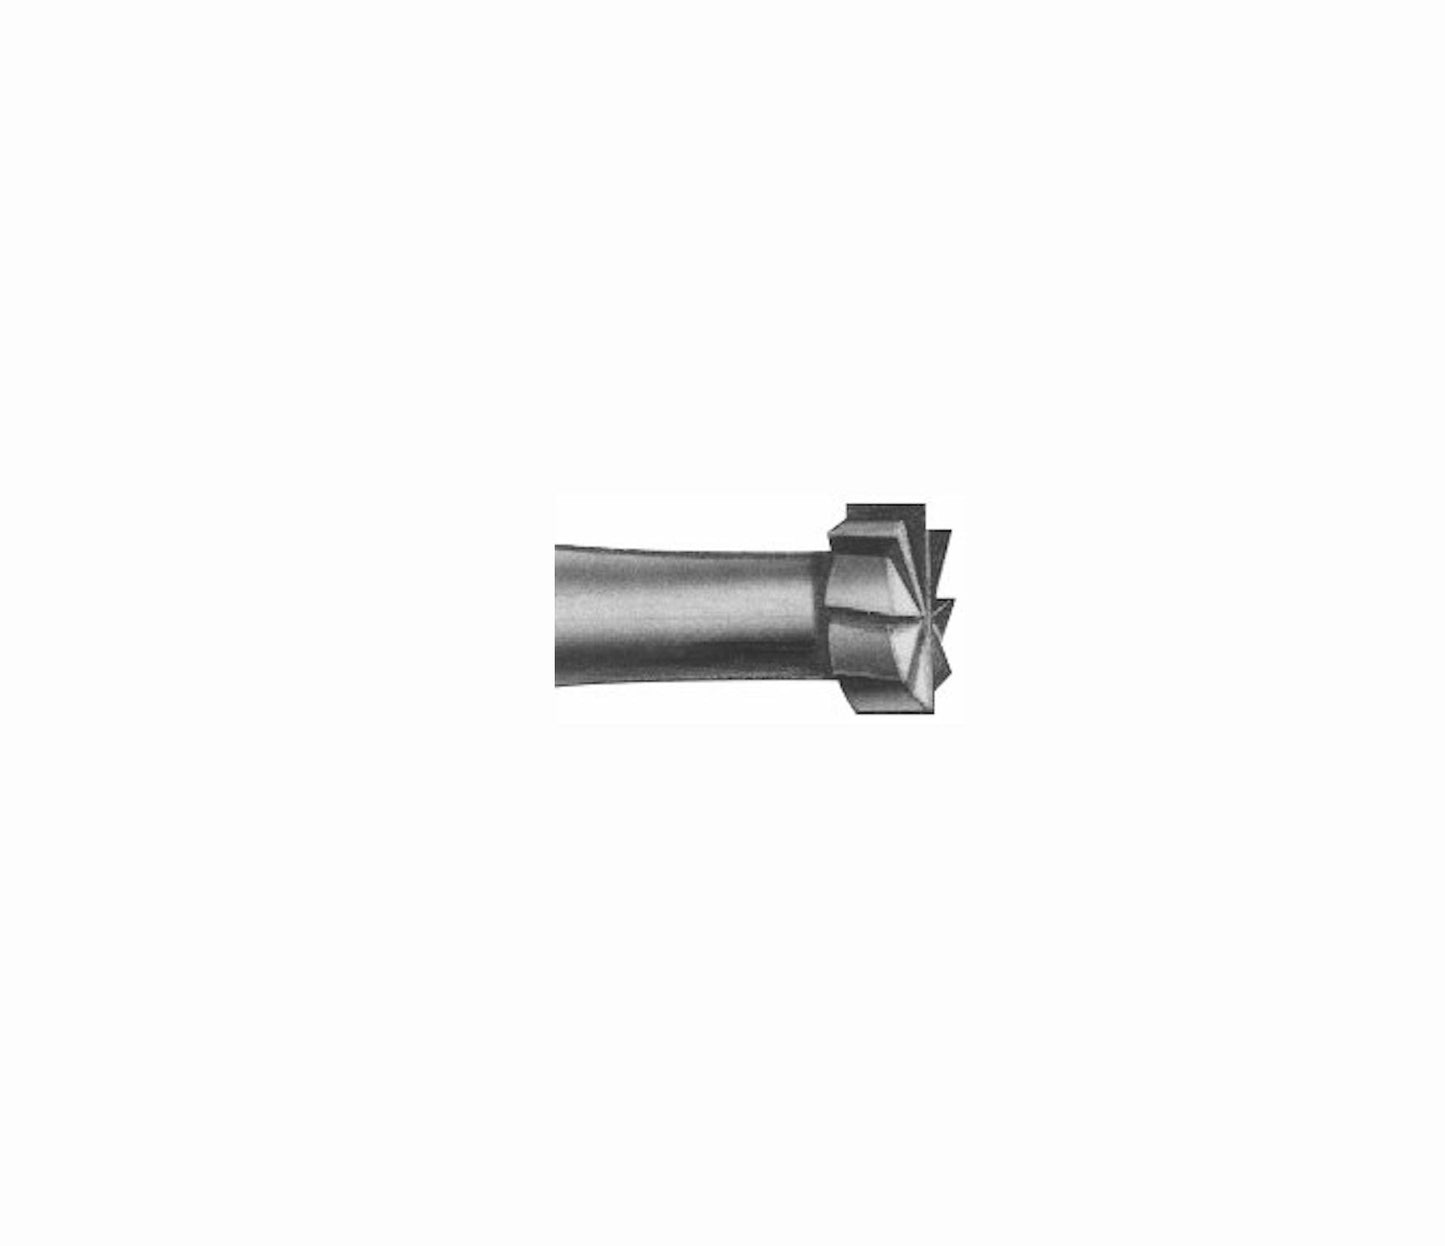 Komet #H3- Carbide Wheel Burr- Pack of 5 (sizes available: 1.20mm and 1.40mm)